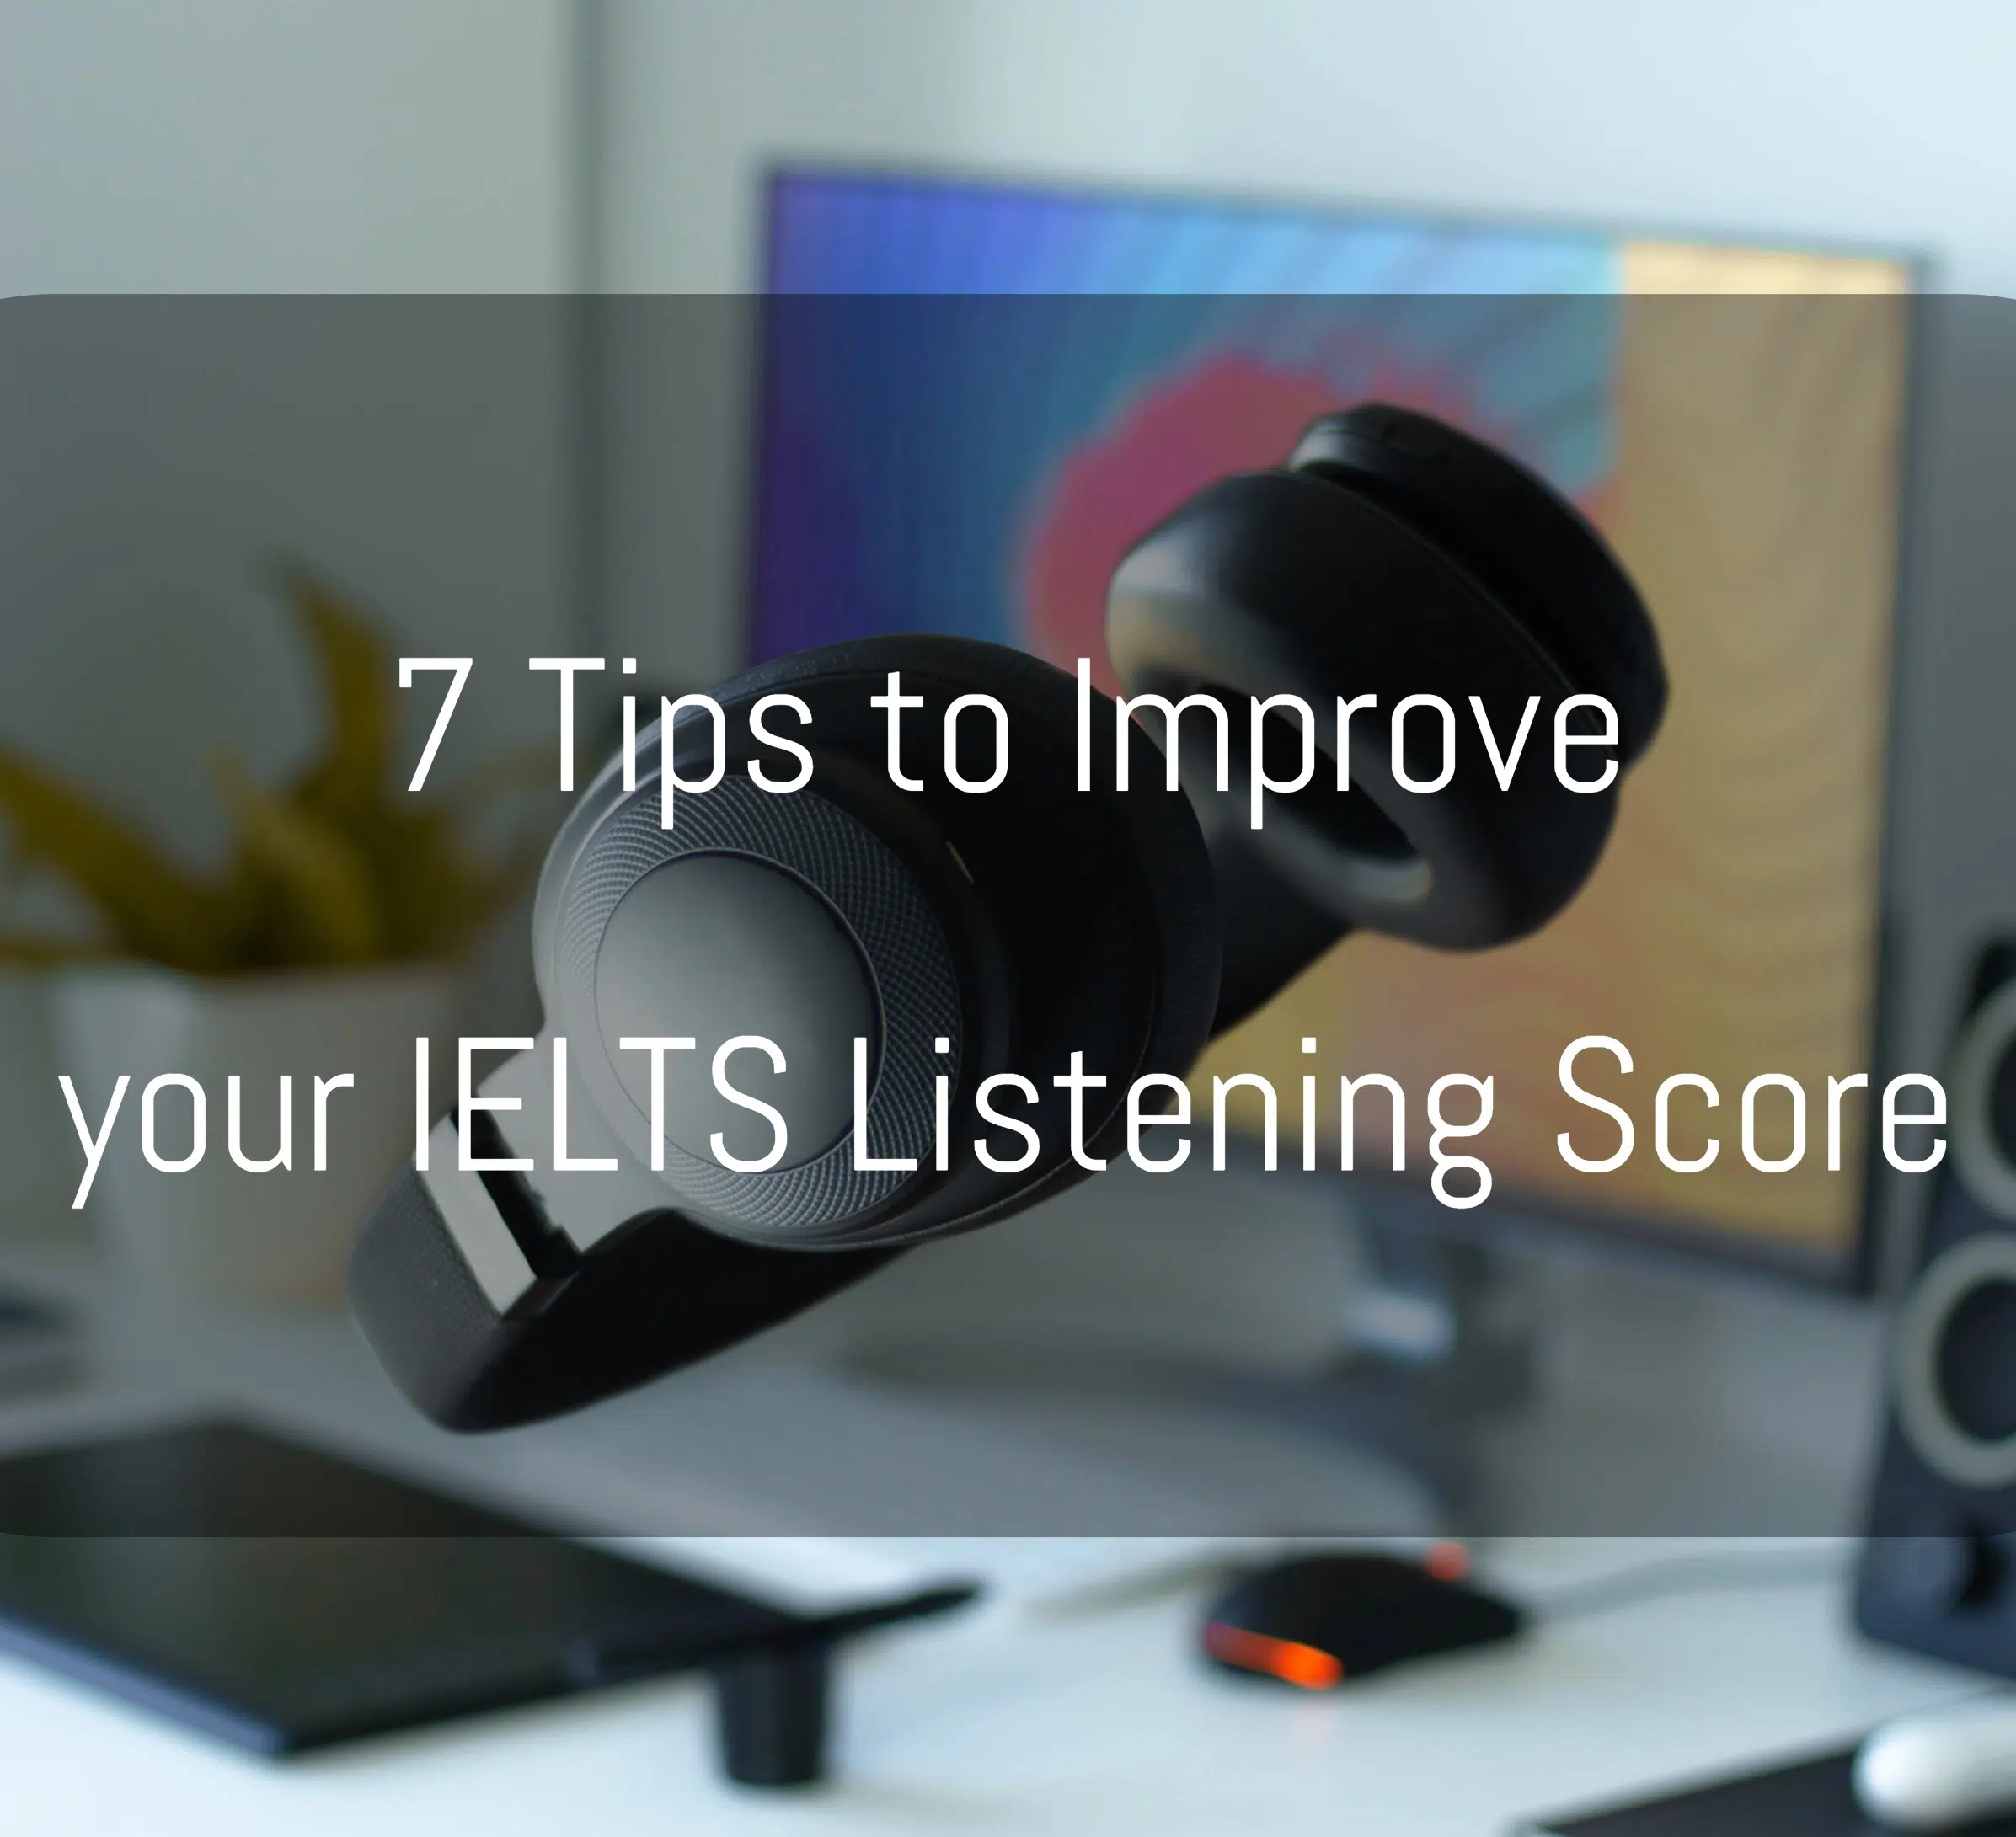 7 tips to improve your ielts listening score